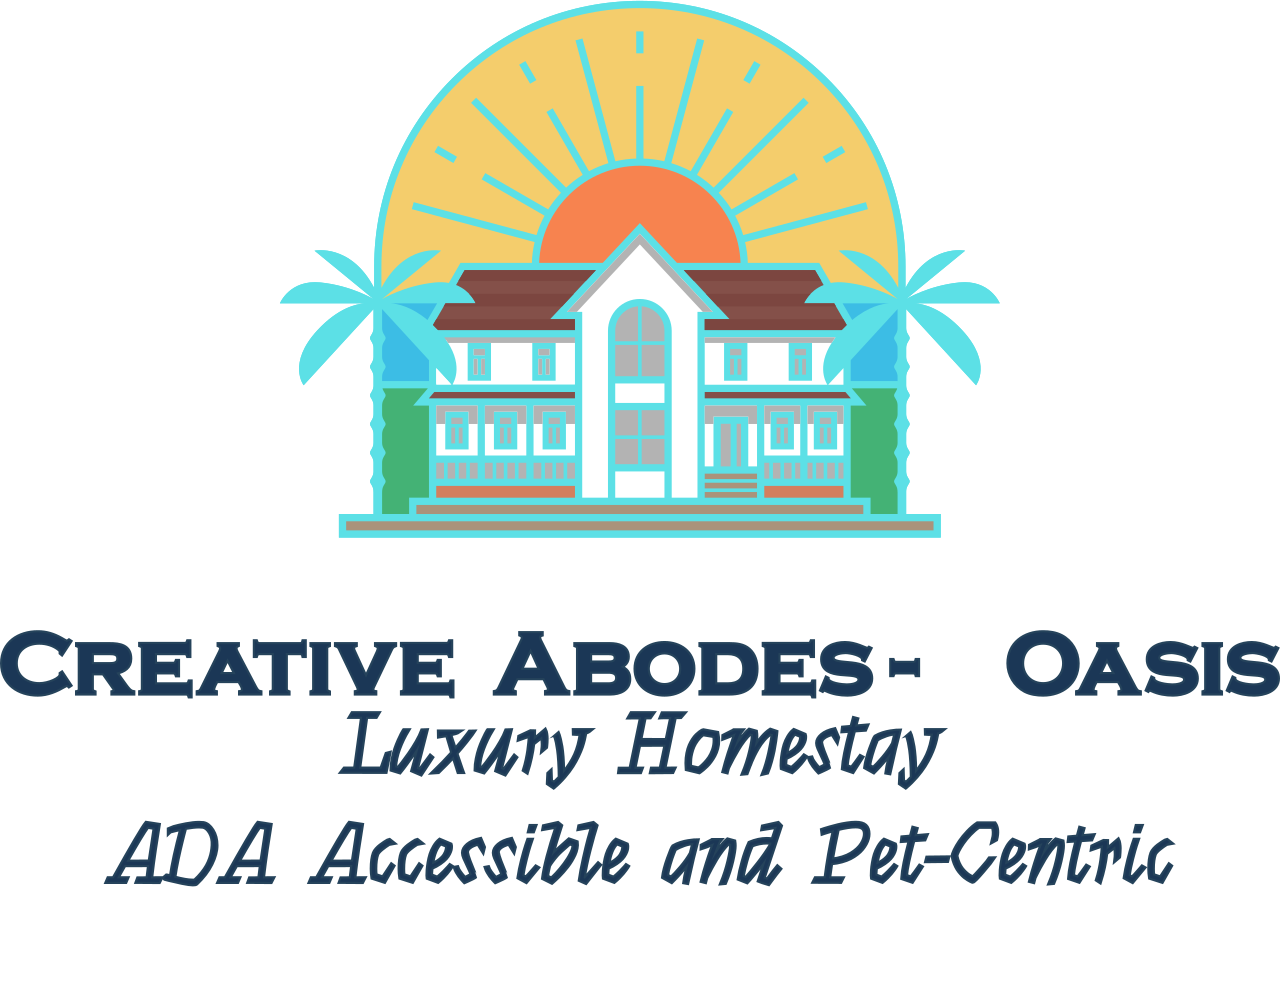 Creative Abodes-  Oasis's web page